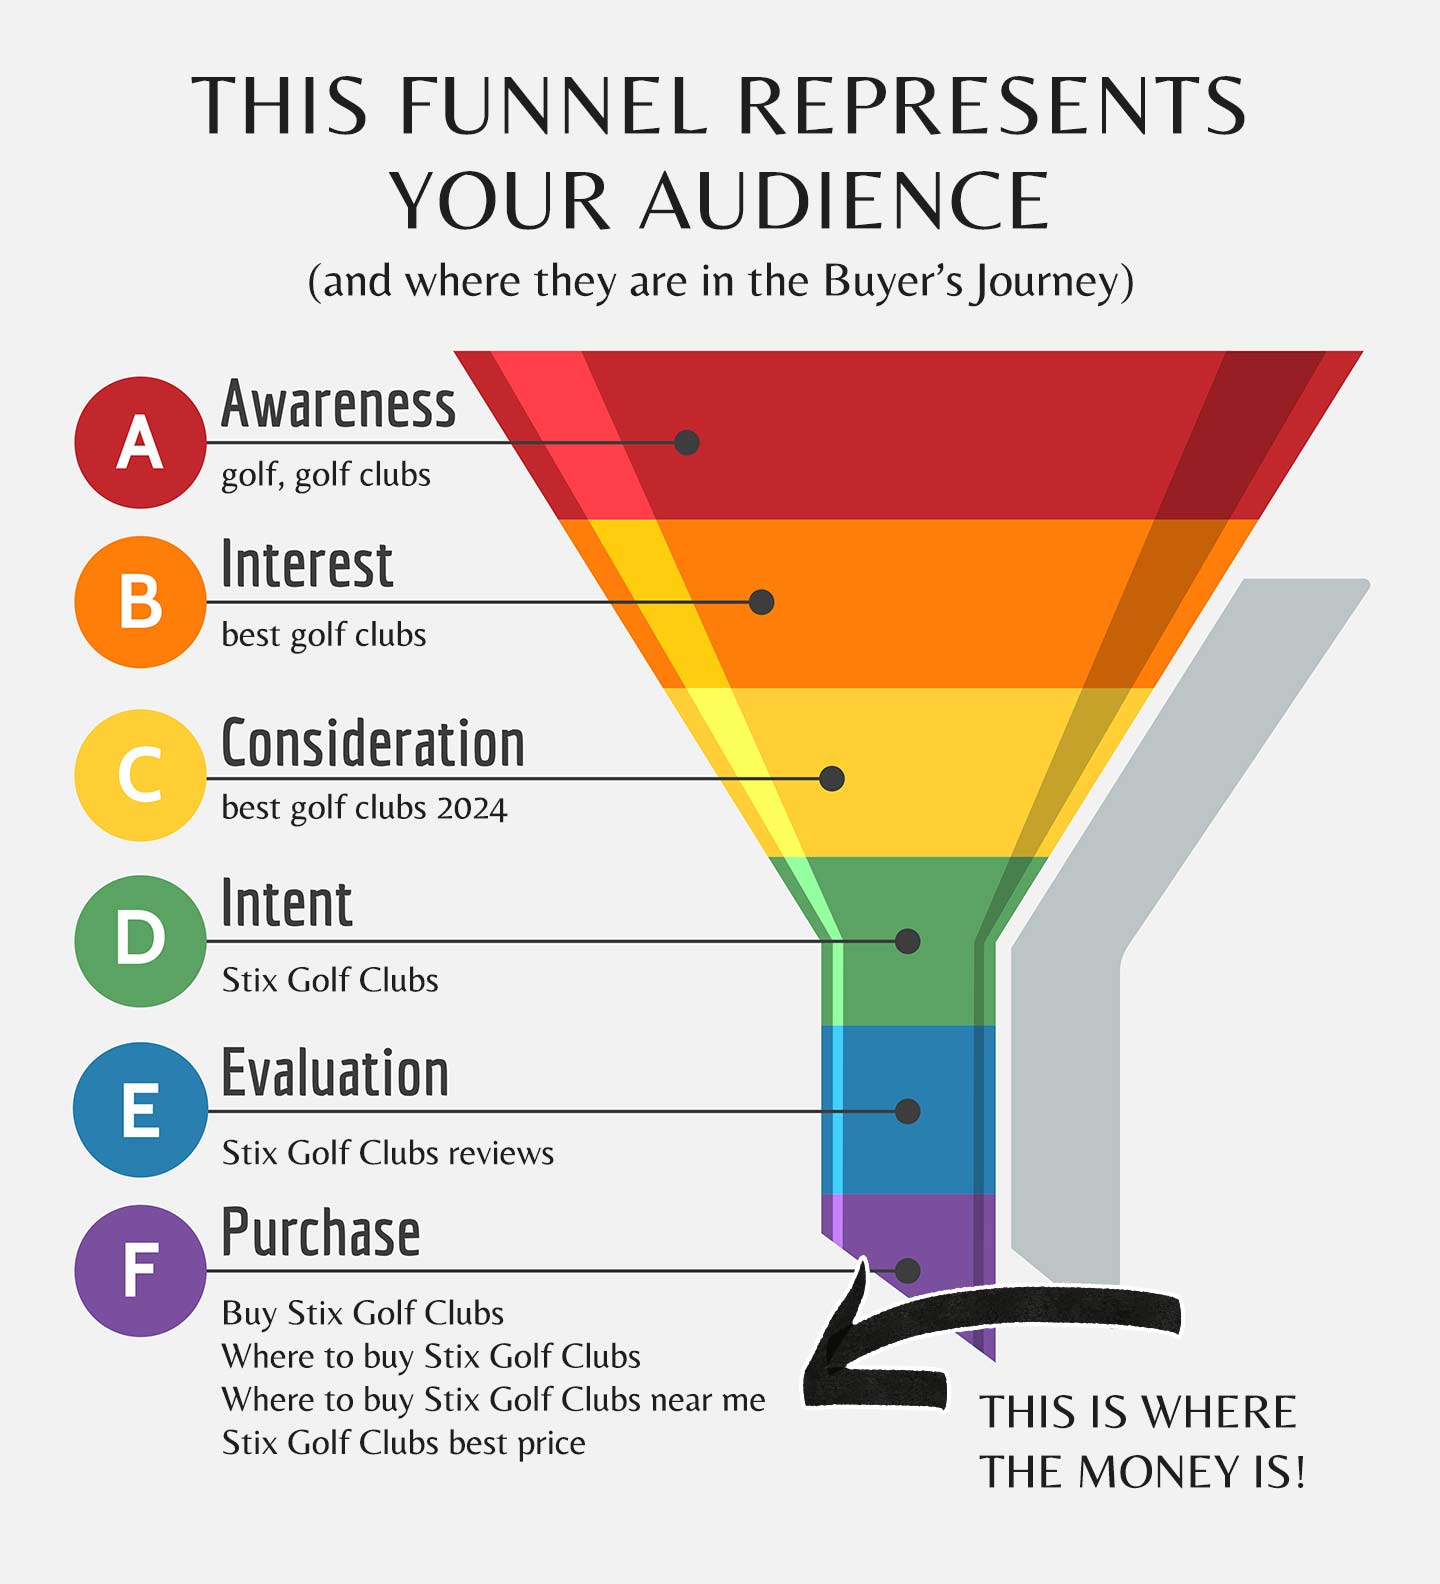 SEO and the Buyer’s Journey